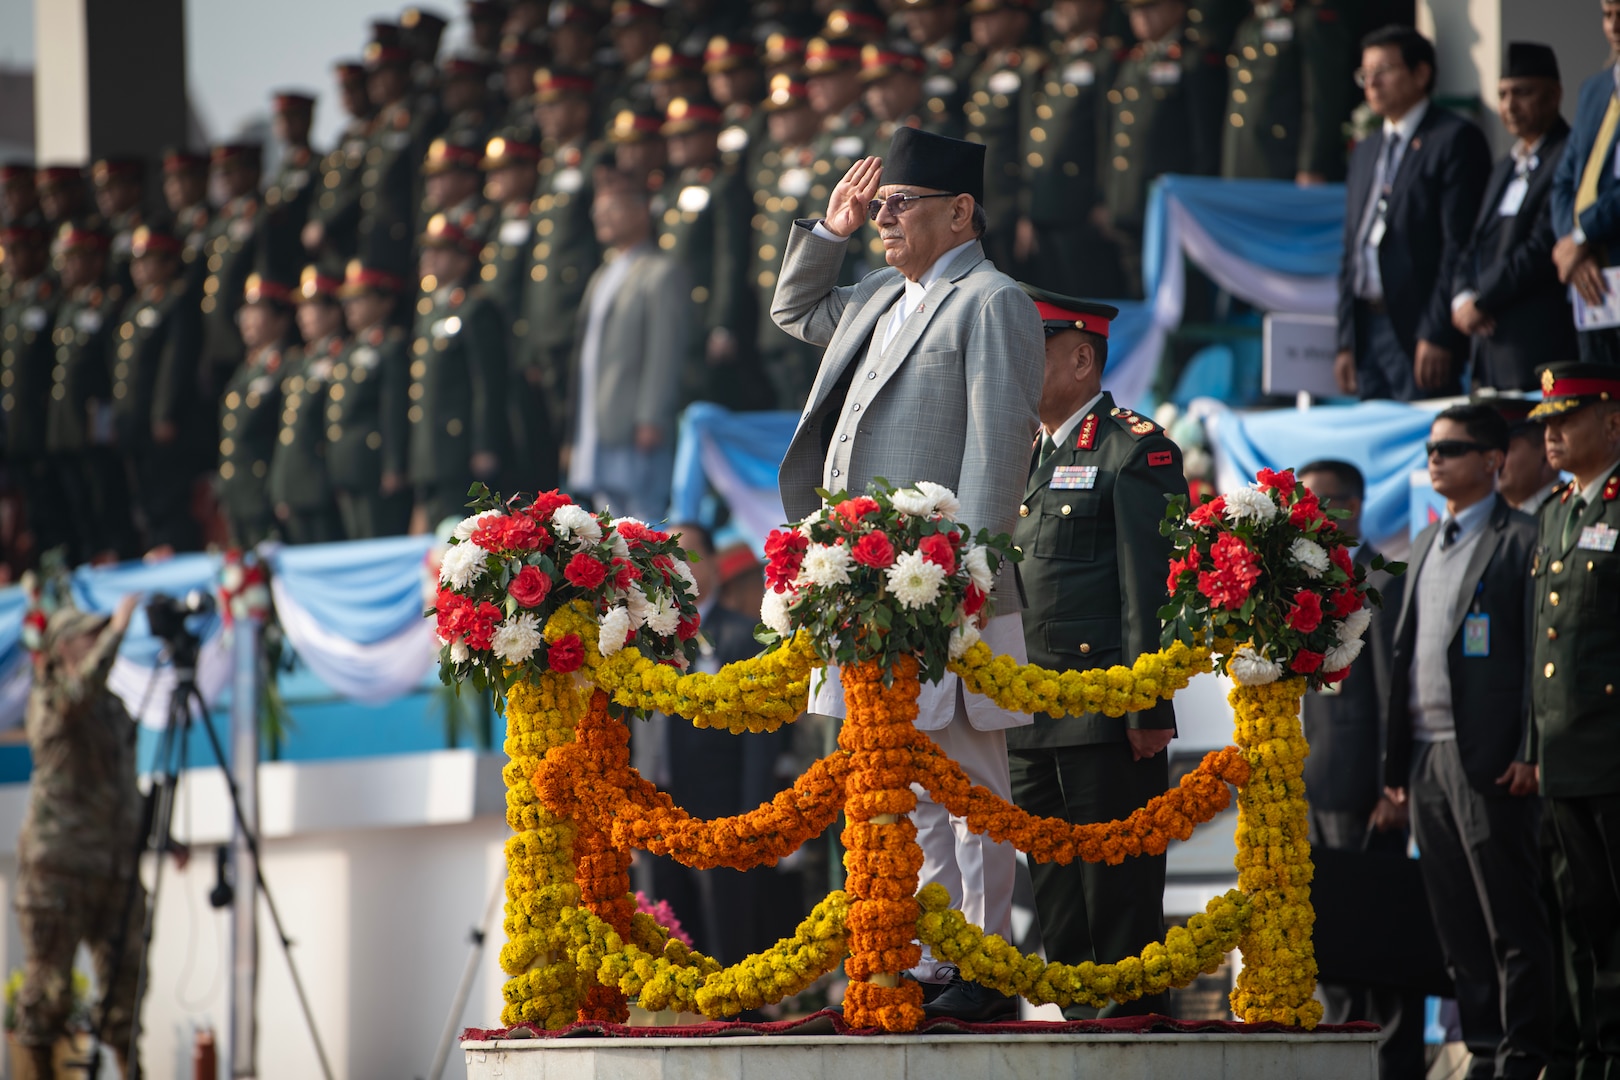 Nepali Prime Minister, Pushpa Kamal Dahal, salutes during the opening ceremony of Exercise Shanti Prayas IV, a Multinational Peacekeeping Exercise, at the Nepali Army Headquarters on Feb. 20, 2024. Shanti Prayas IV is a multinational peacekeeping exercise sponsored by the Nepali Army and U.S. Indo-Pacific Command and is the latest in a series of exercises designed to support peacekeeping operations. (U.S. Marine Corps photo by Lance Cpl John Hall)